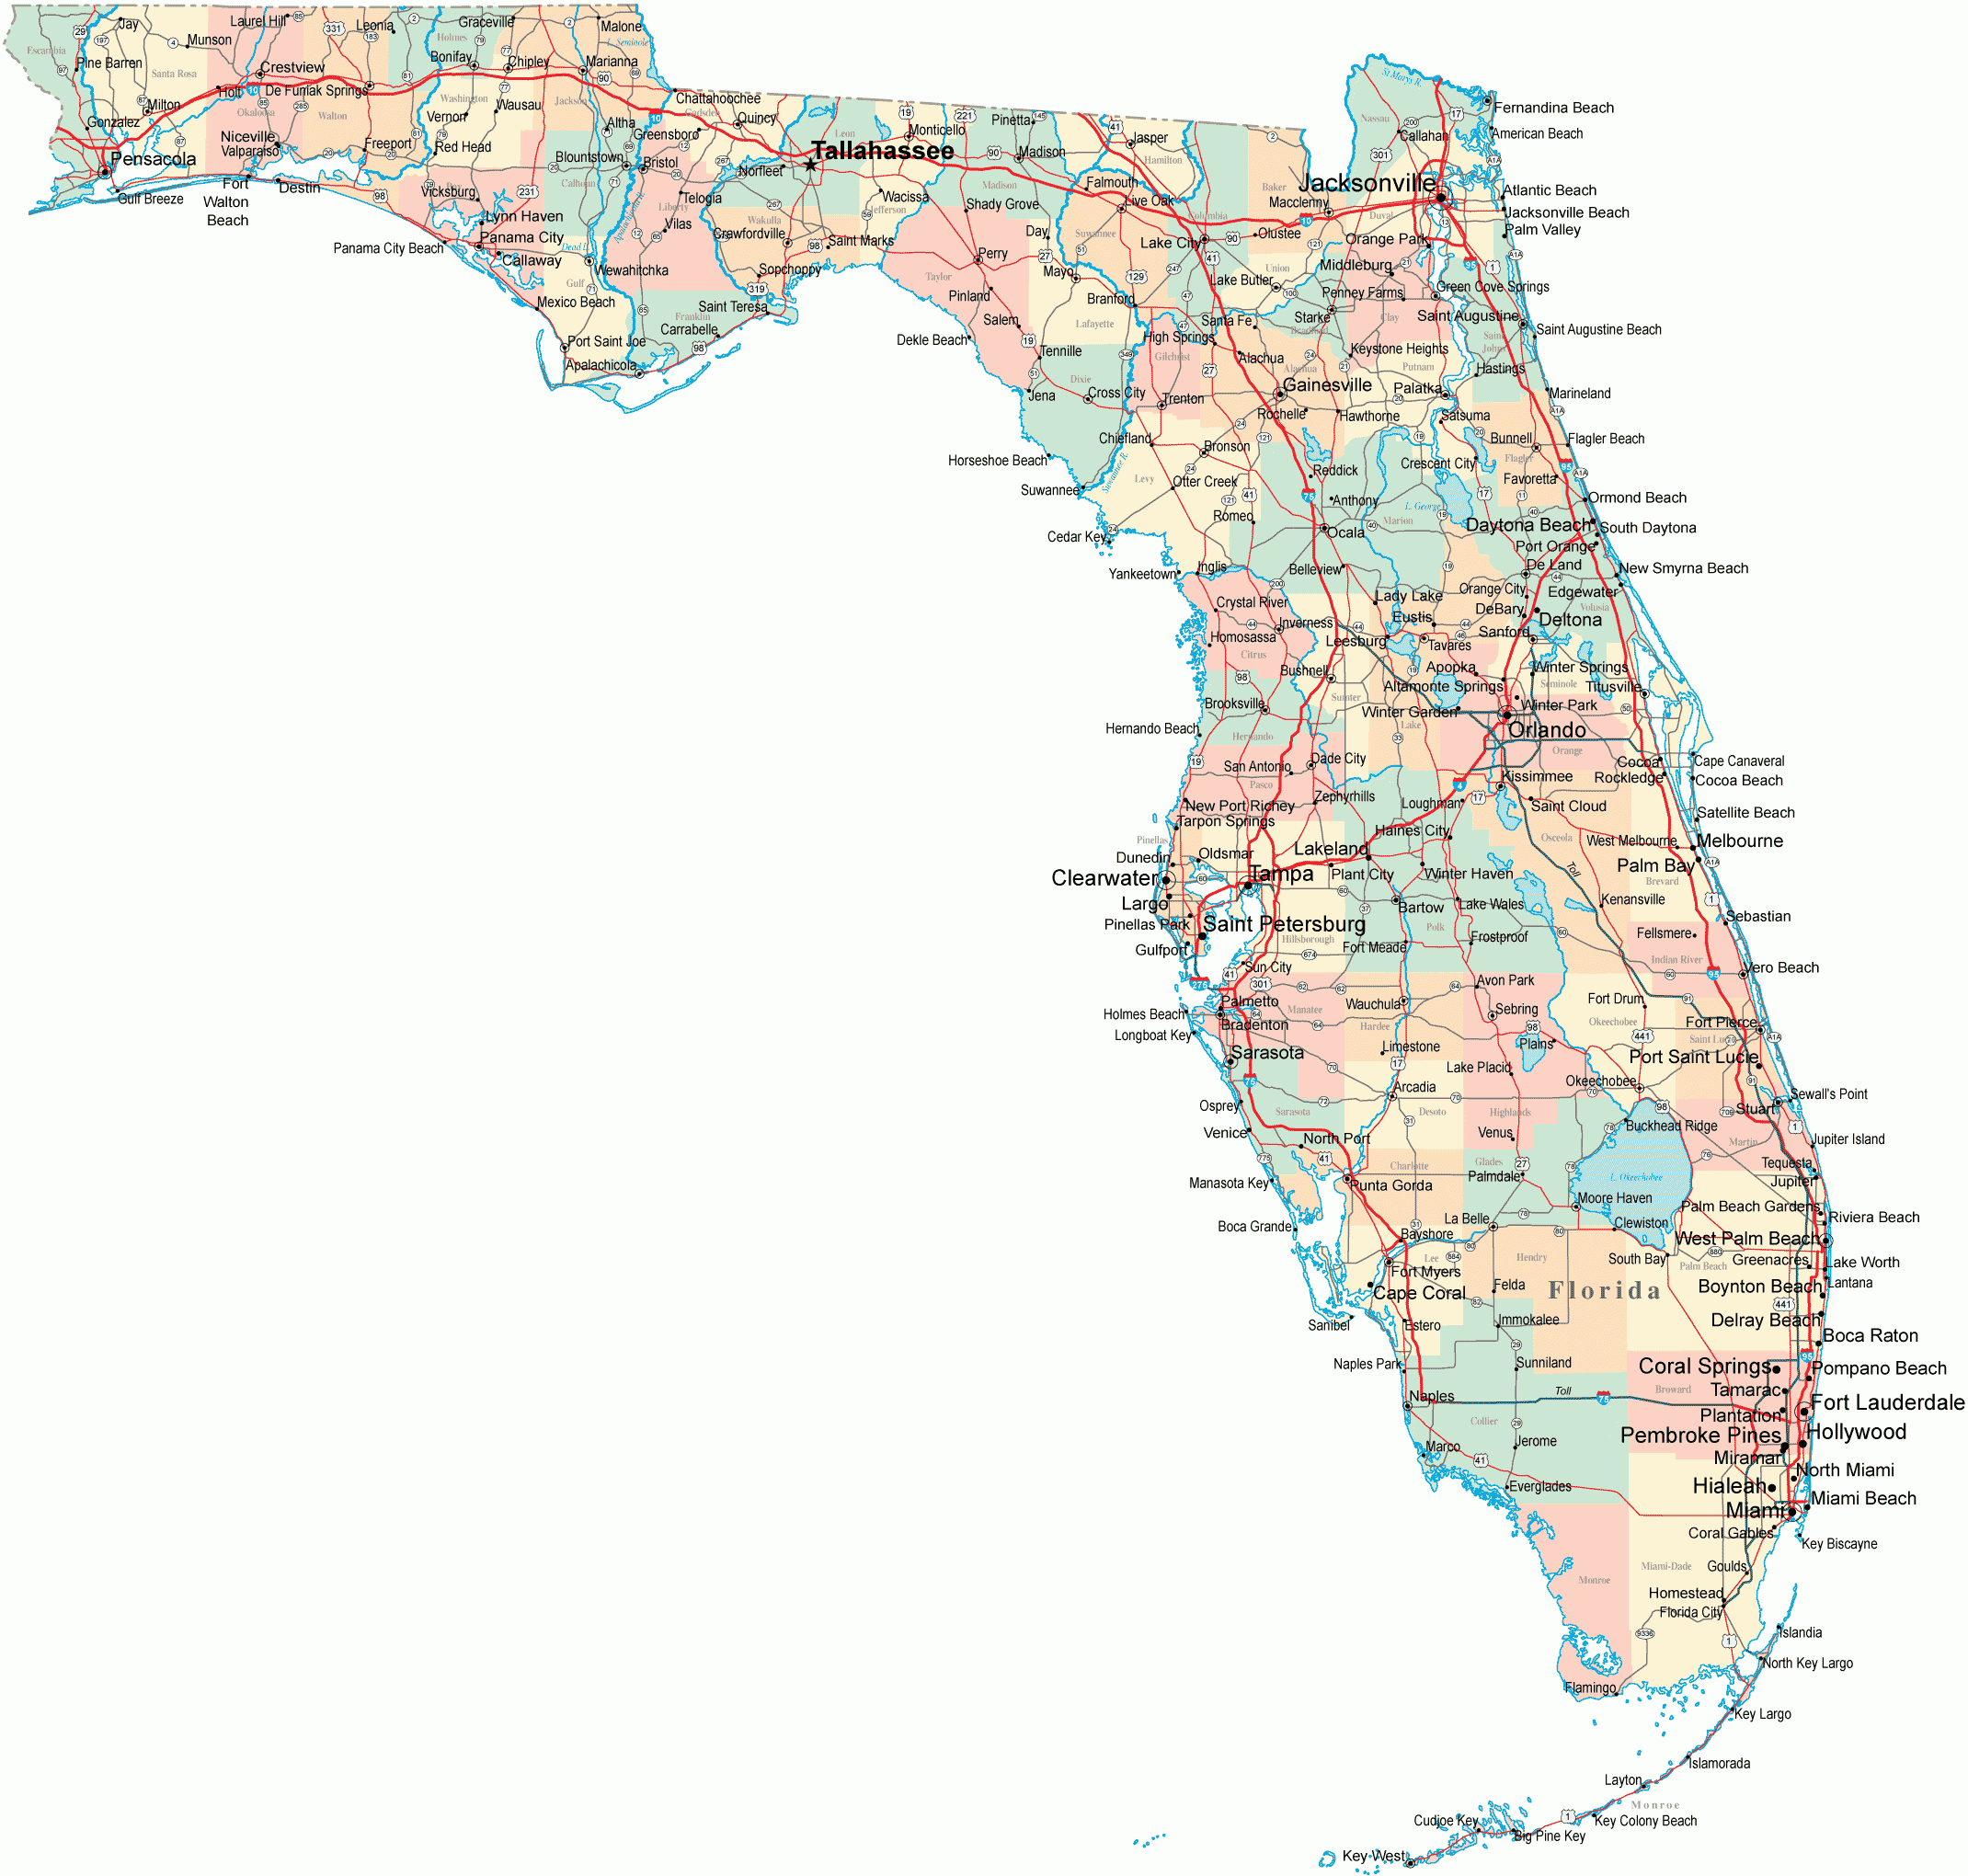 Florida Road Map - Fl Road Map - Florida Highway Map - Map Of South Florida Towns